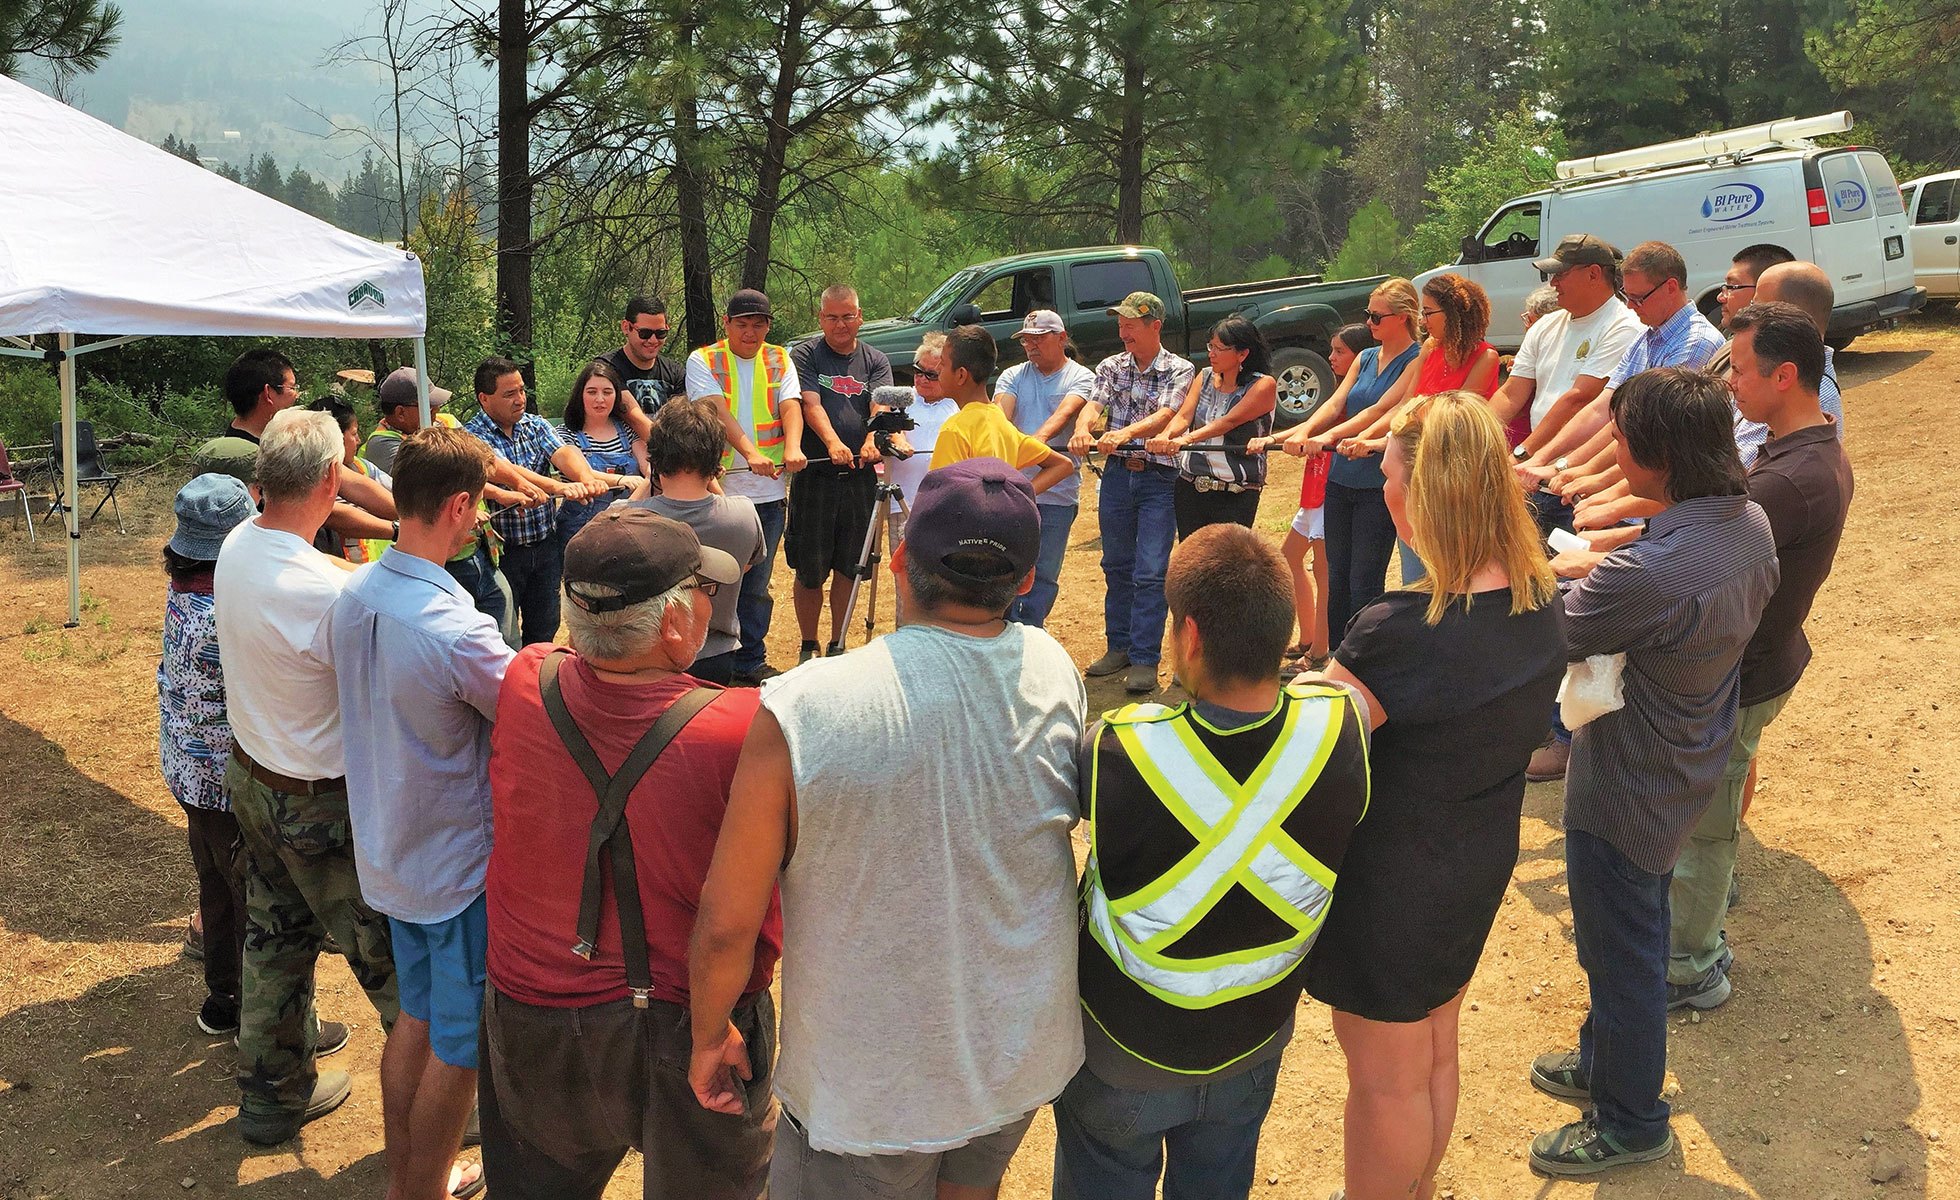 Lytton First Nation's circle of trust